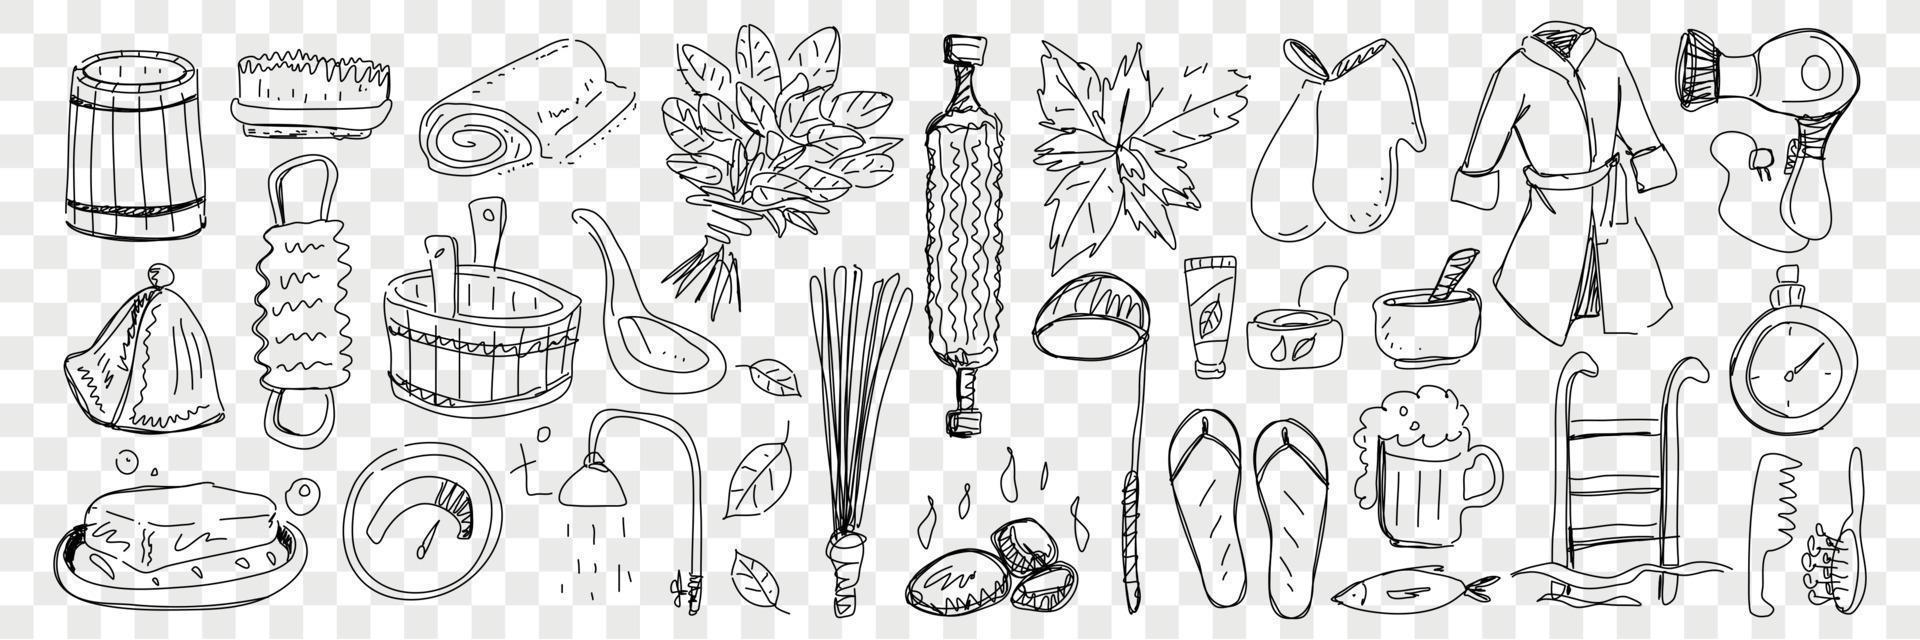 Bath and sauna attributes doodle set. Collection of hand drawn bathrobe, hot stones, basins, slippers shower hats brooms brush mittens beer for enjoying bath isolated on transparent background vector